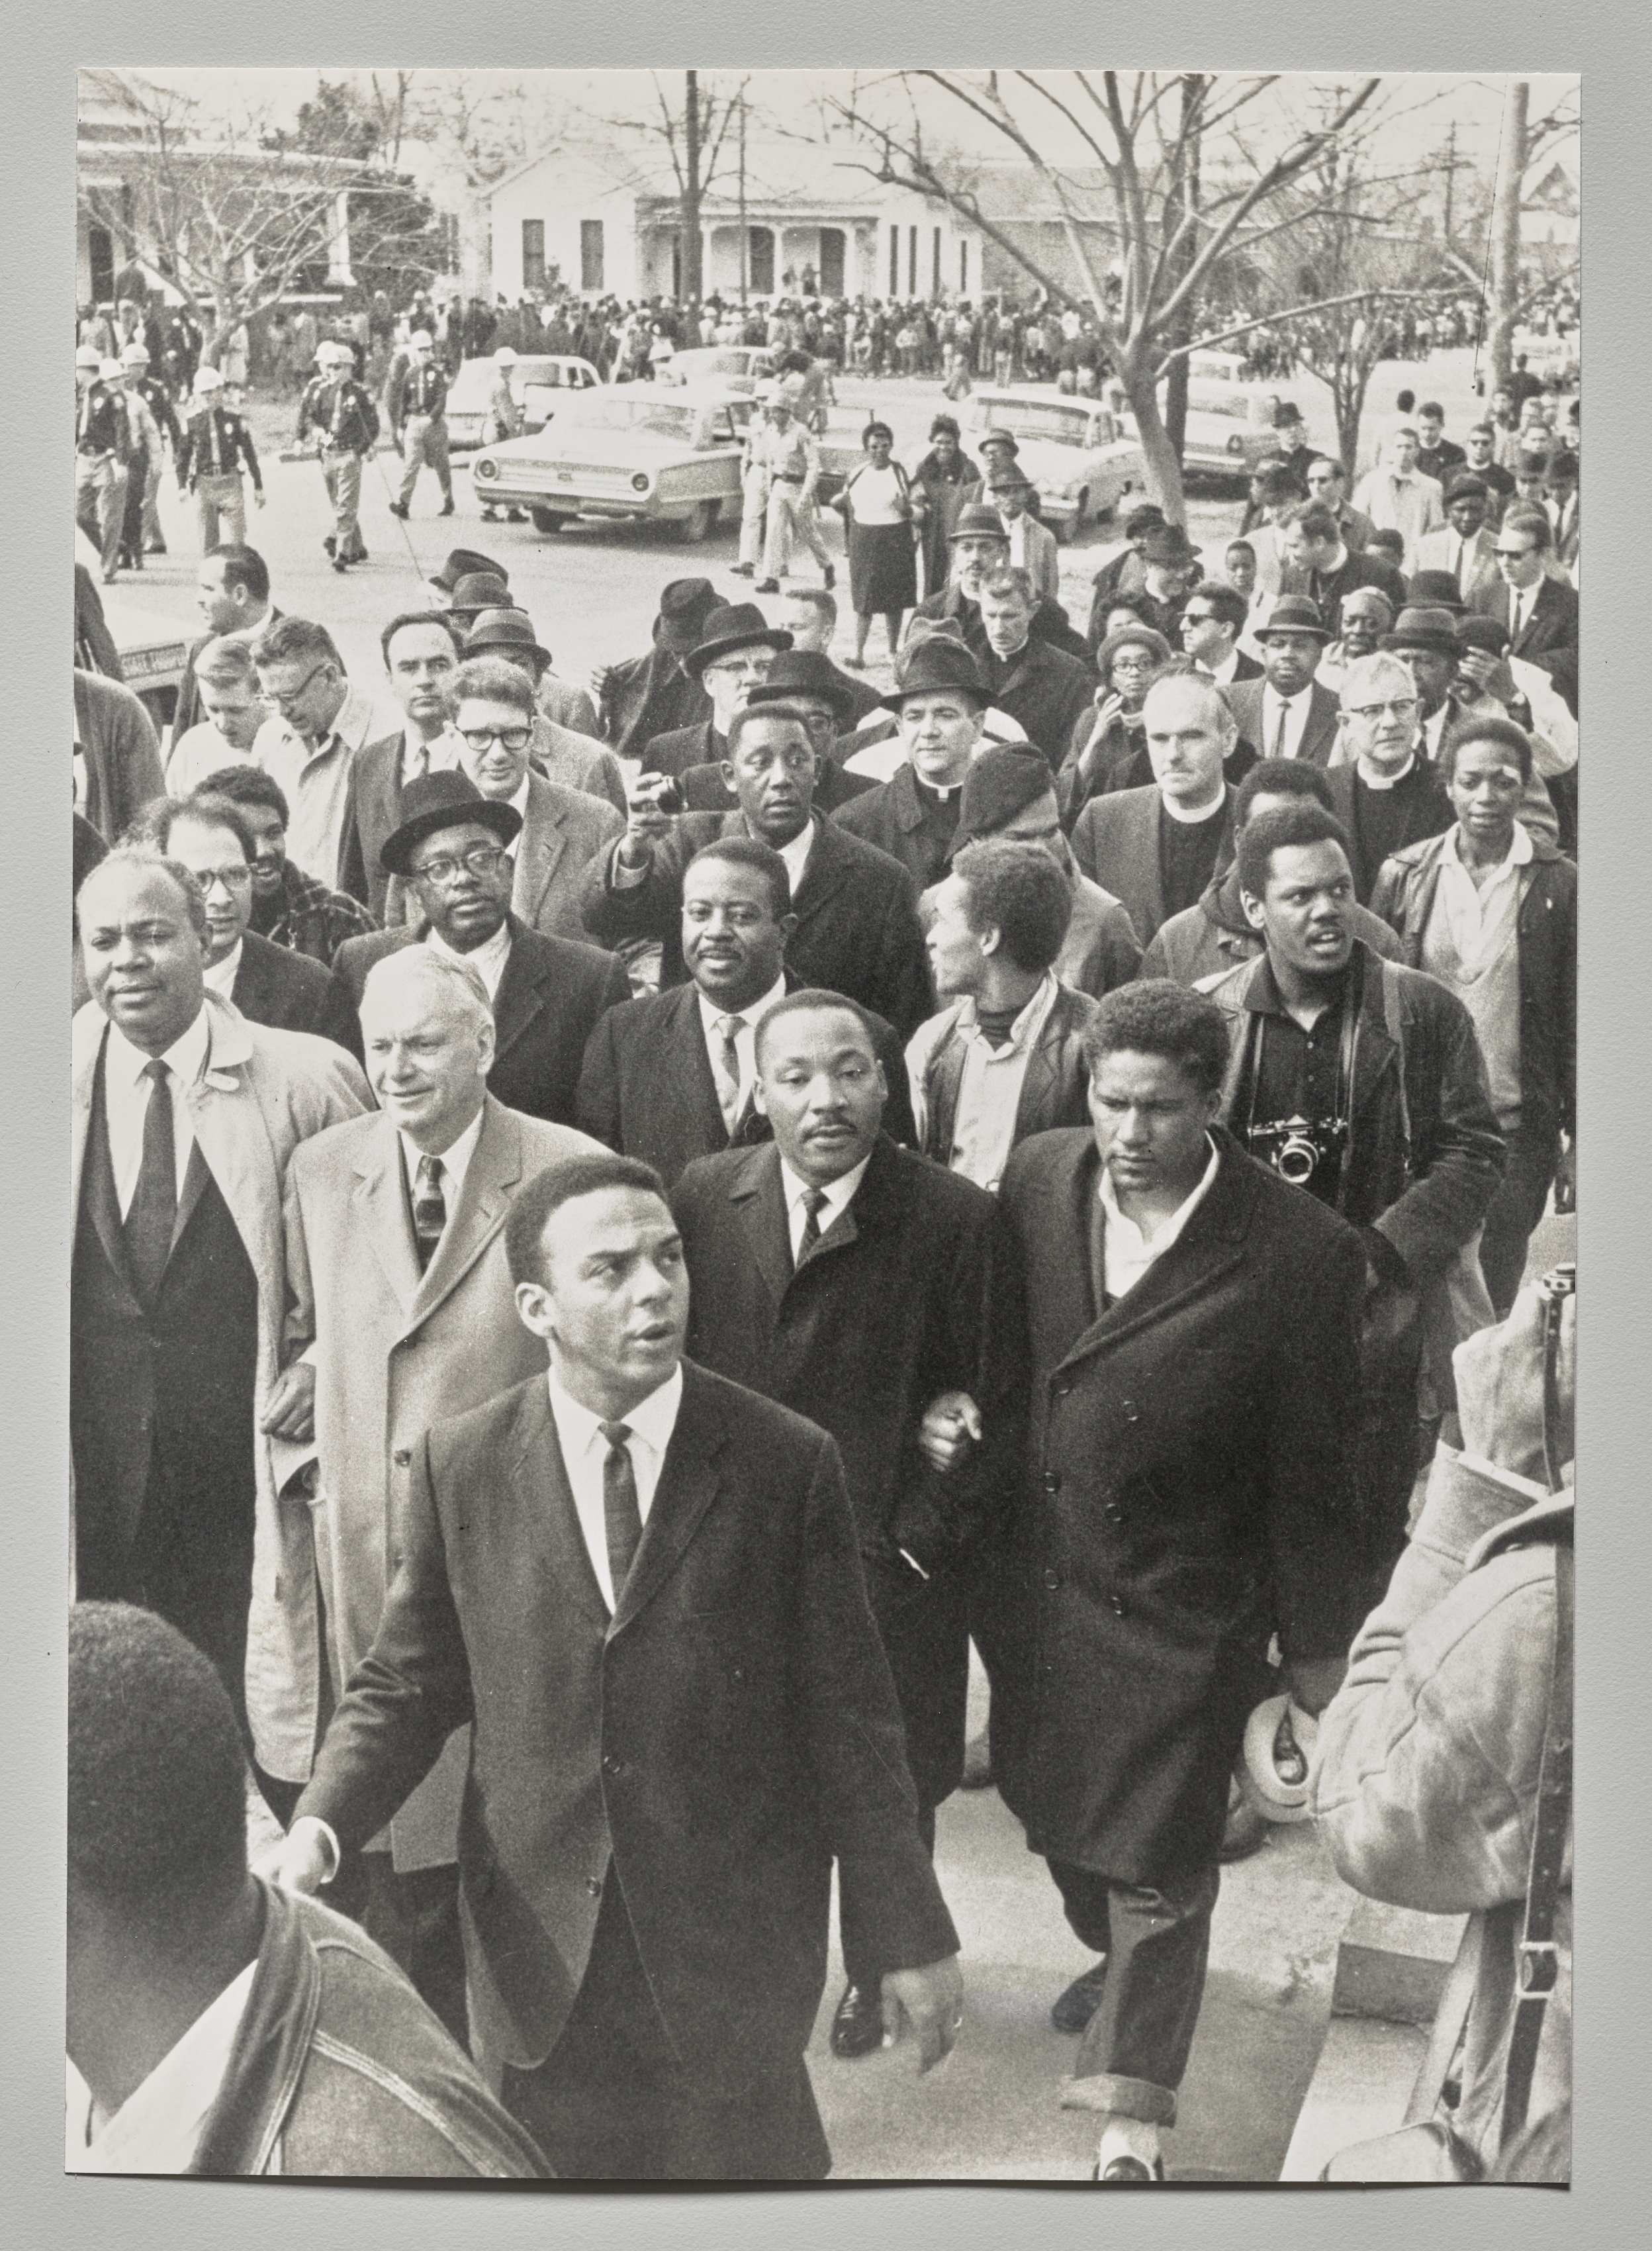 Civil Rights March: The Reverend Andrew Young, foreground, wearing tie, precedes Dr. Martin Luther King Jr., first row, second from right, as civil rights activists and clergymen (including James Forman, James Farmer, Ralph Abernathy, and Charles Evers) conducted a second protest march in Selma, Alabama. King led about 2,500 marchers out on the Edmund Pettus Bridge and held a short prayer session before turning them around, thereby obeying the court order preventing them from making the full march. March 9, 1965